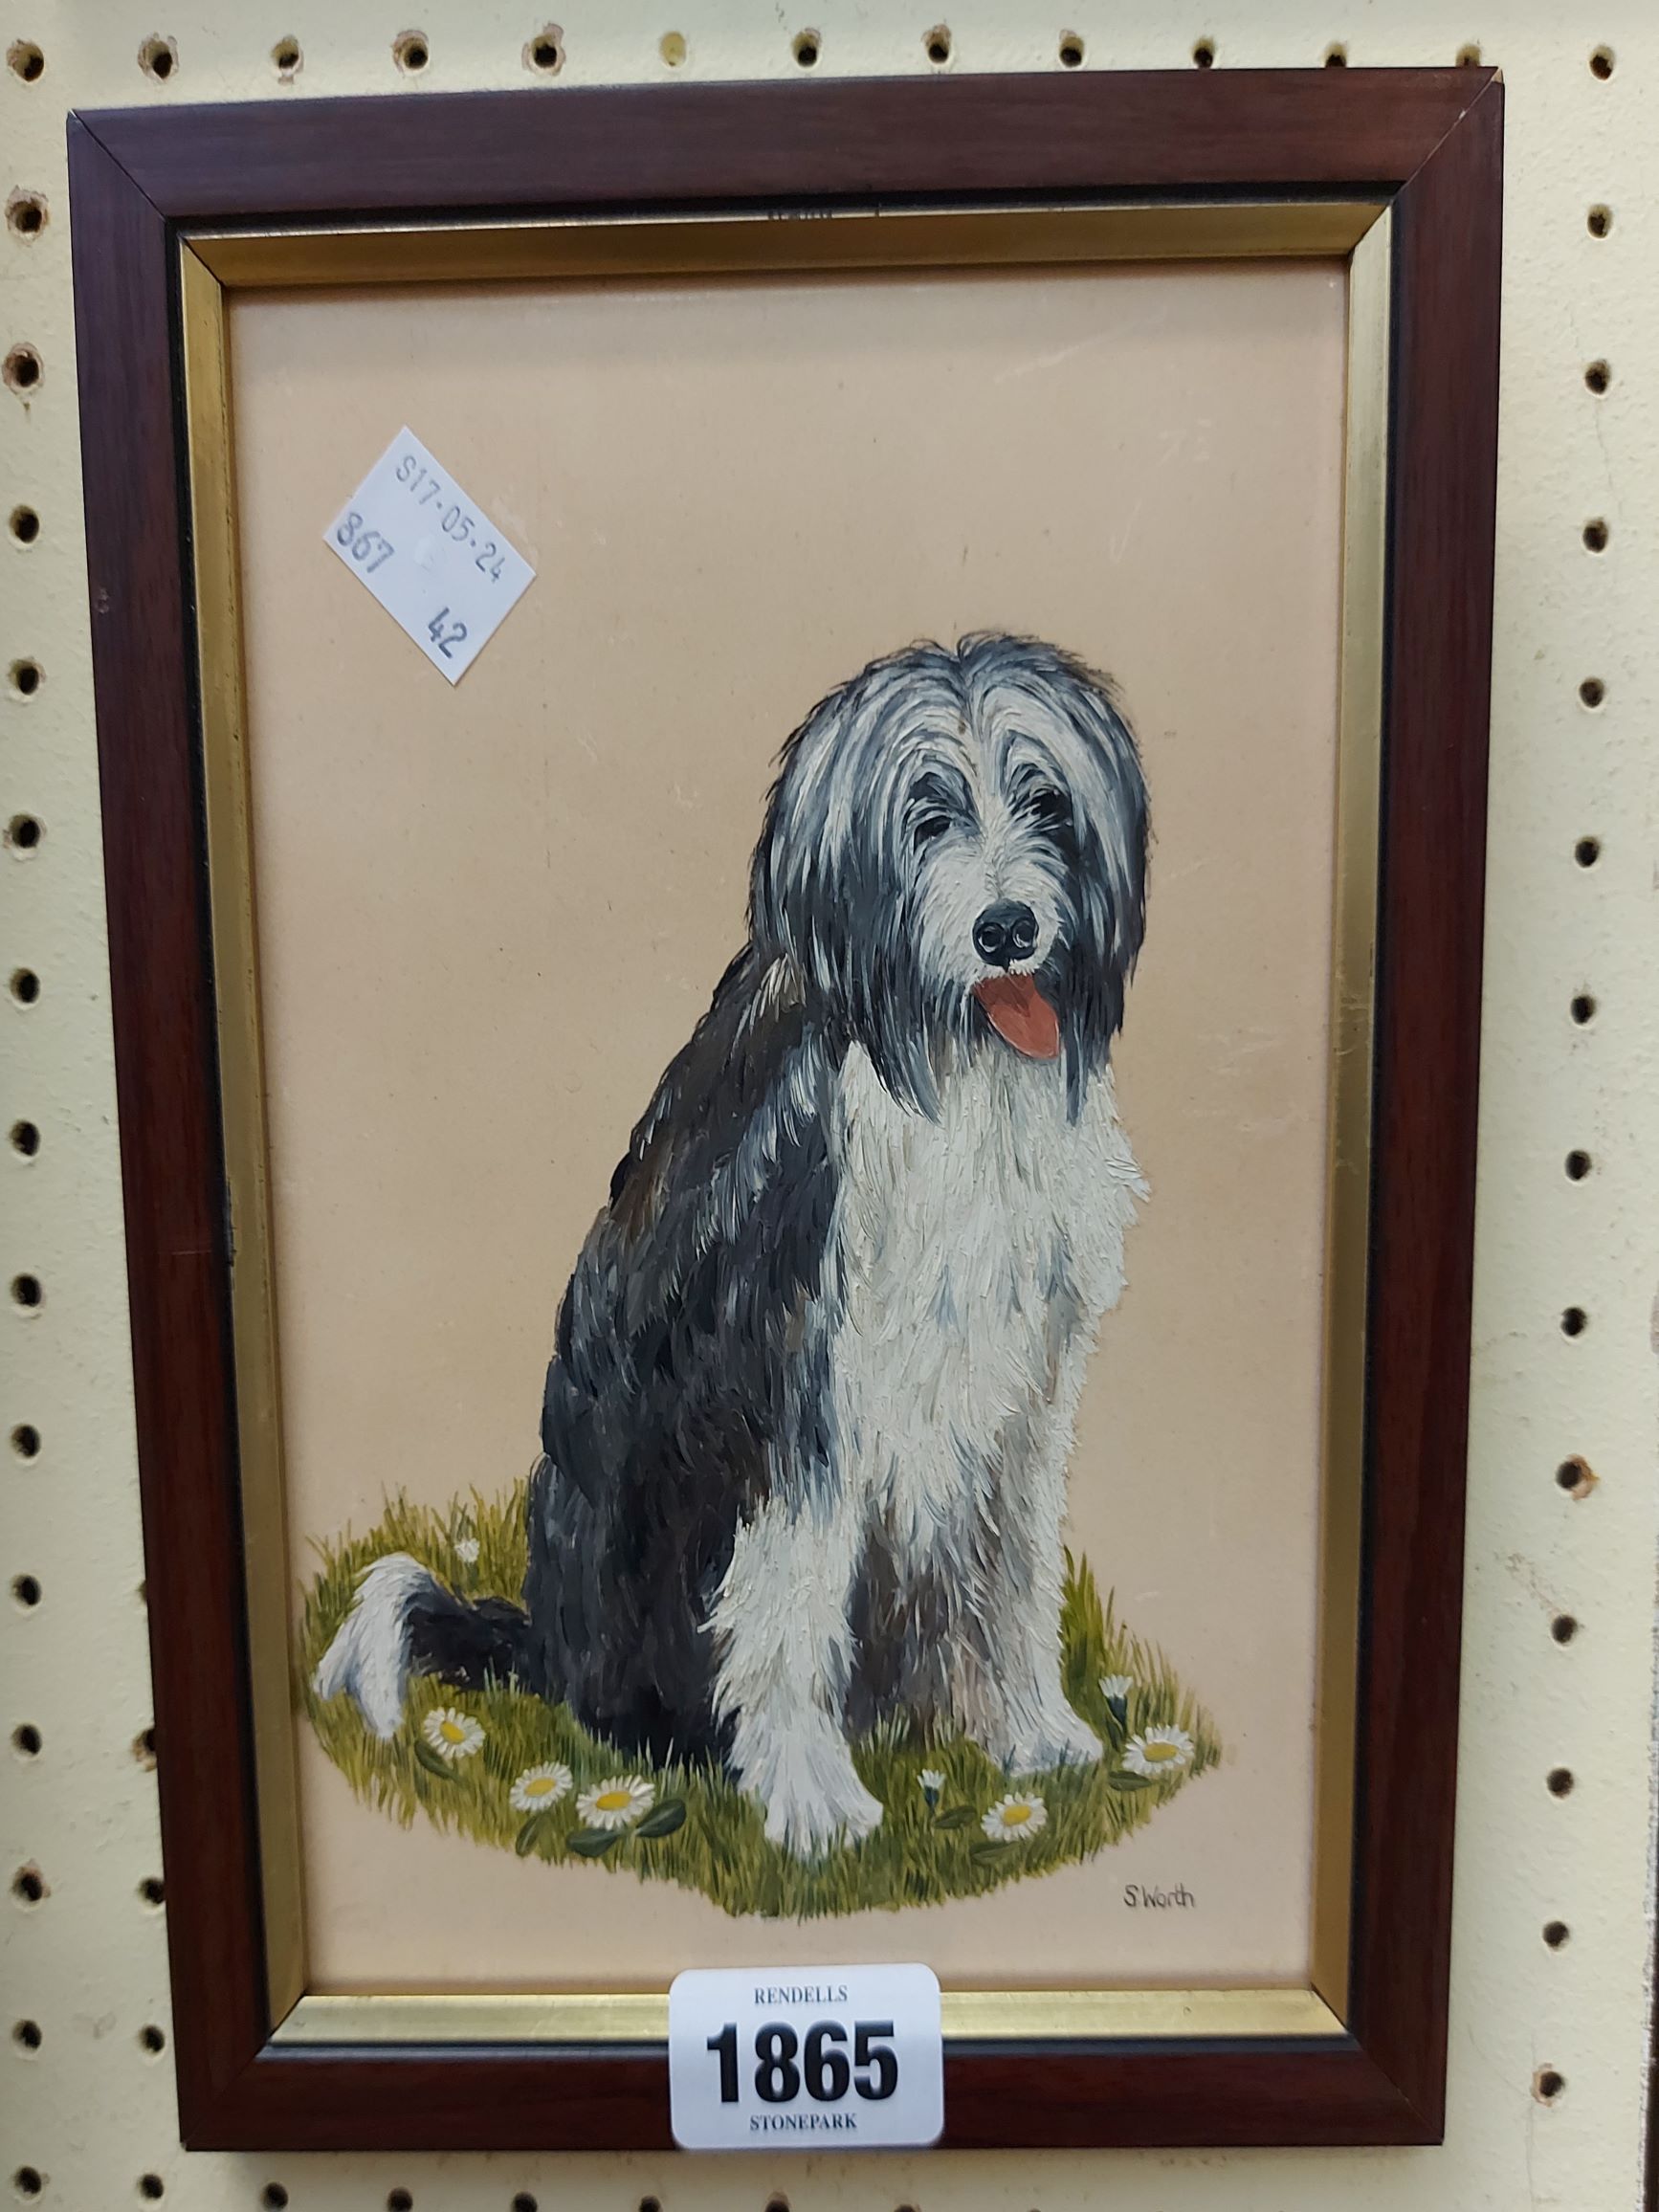 S. Worth: a framed oil painting of an old English sheepdog on ceramic panel - signed